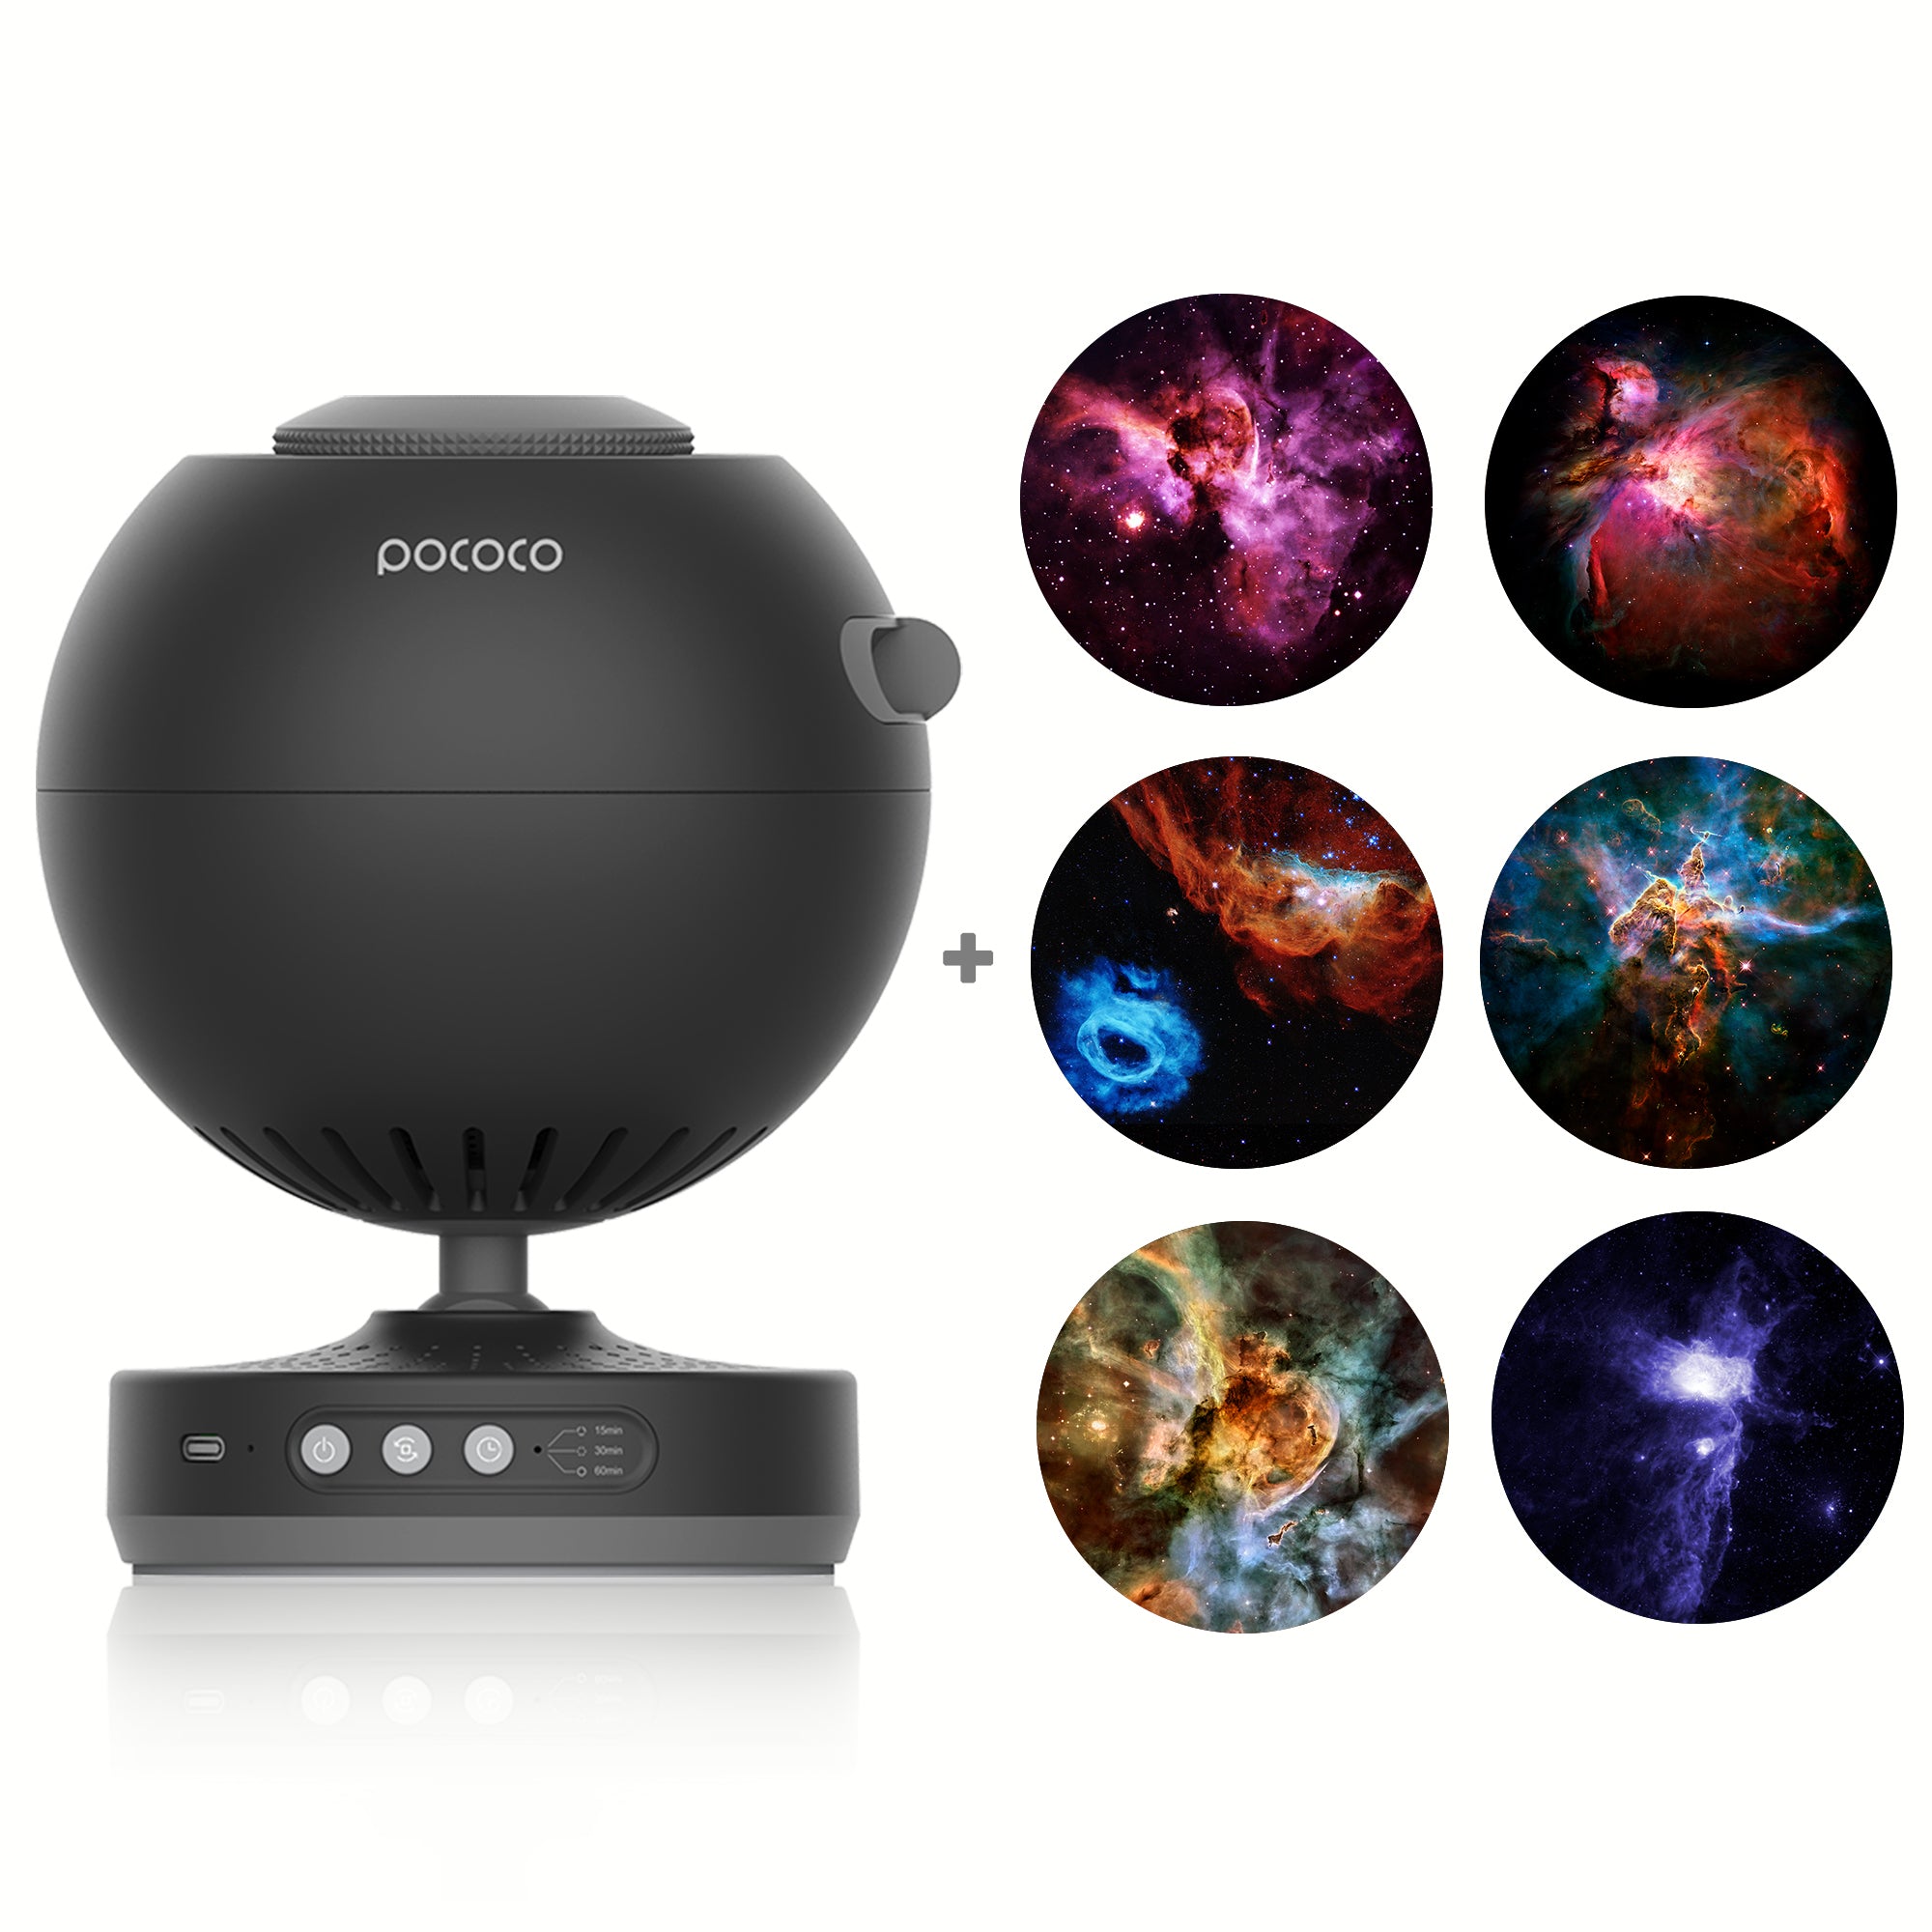 POCOCO Realistic Constellation-1 Galaxy Star Projector Night Light Discs:  Realistic Galaxy Patterns, 5K Ultra HD, 96% Light Transmission, High  Brightness - 6-Piece Pack (Projector Not Included) 